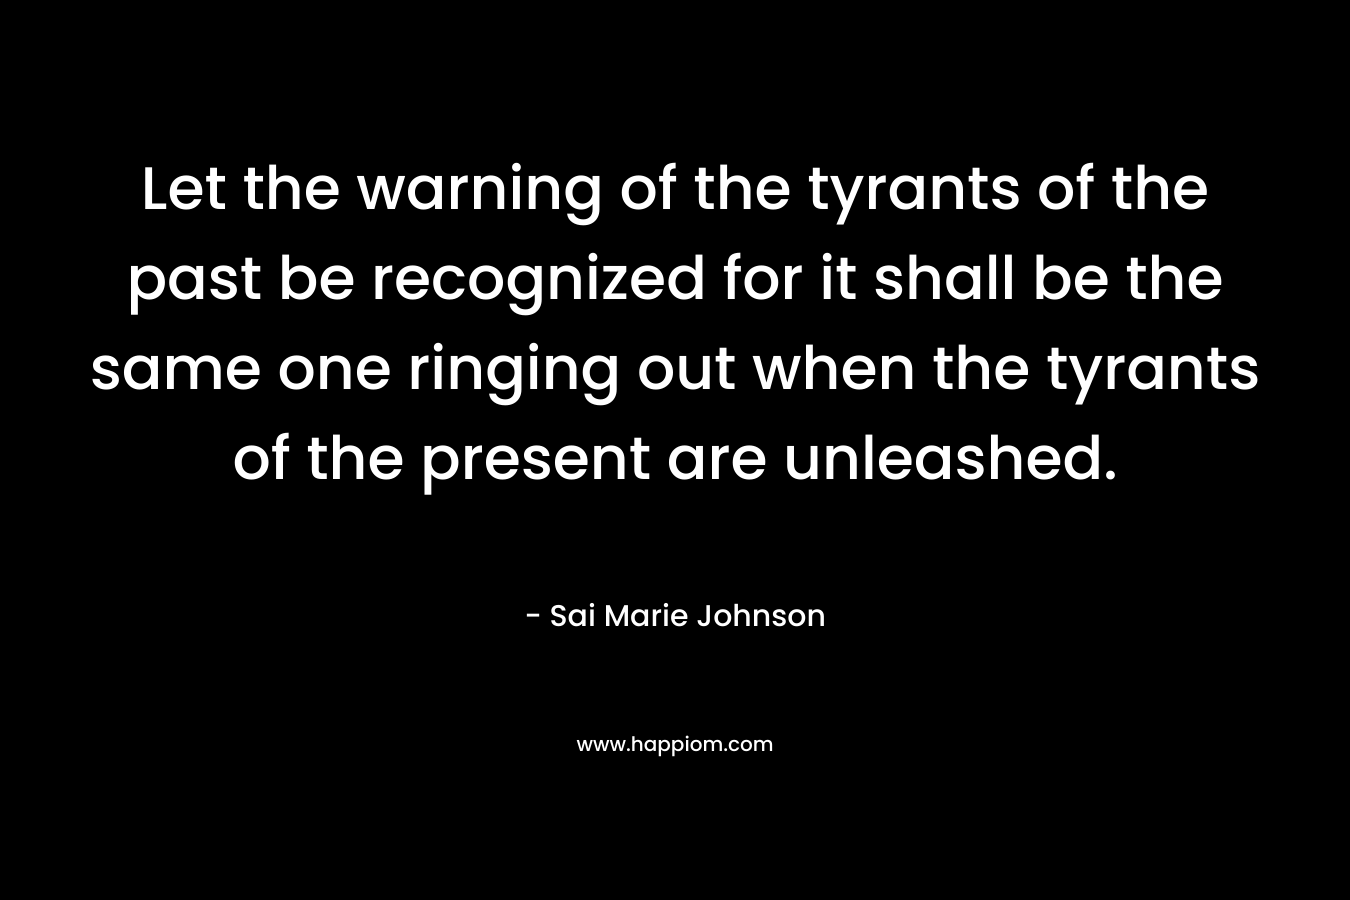 Let the warning of the tyrants of the past be recognized for it shall be the same one ringing out when the tyrants of the present are unleashed. – Sai Marie Johnson